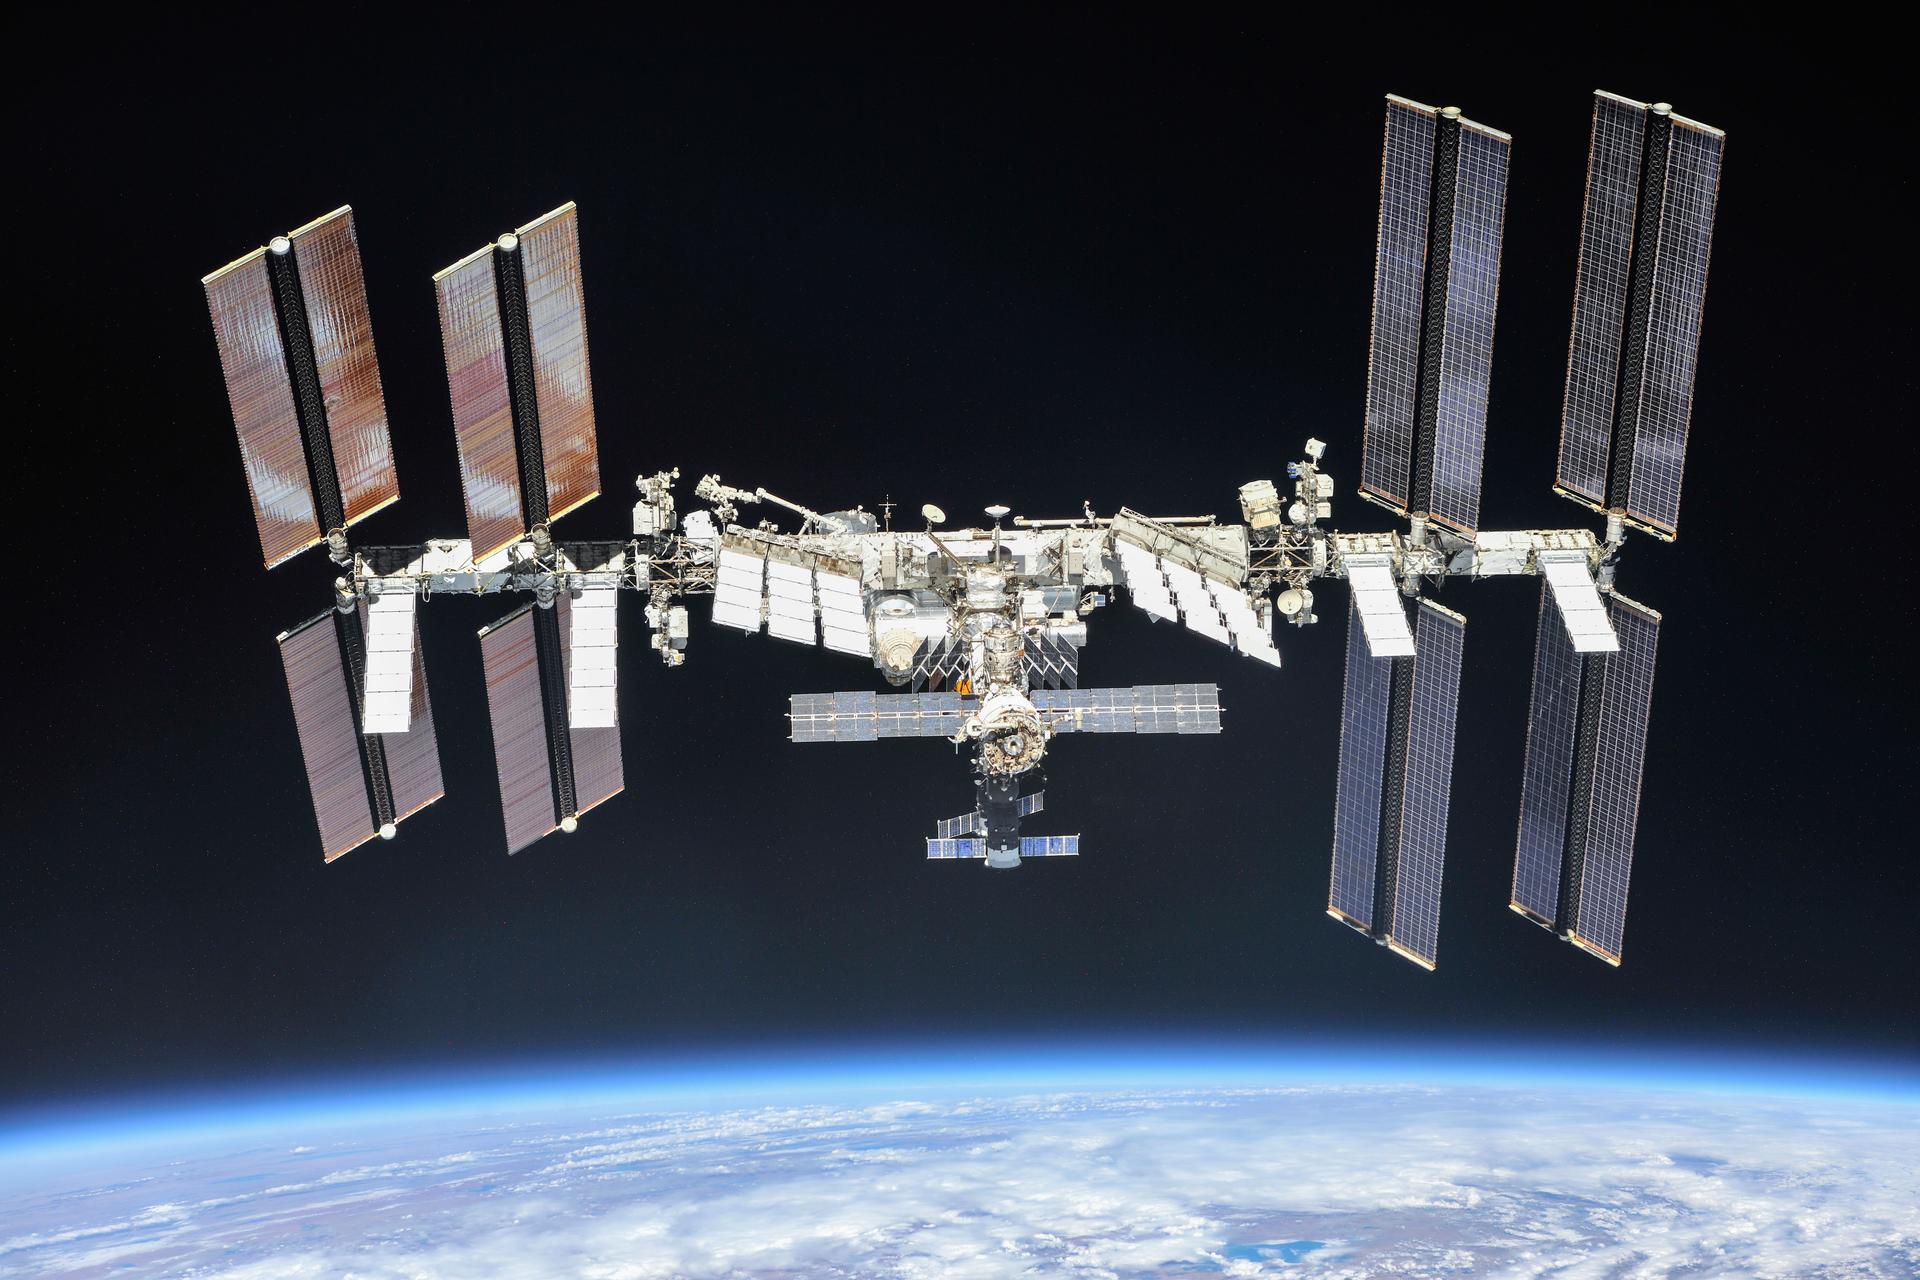 The International Space Station photographed by Expedition 56 crew members from a Soyuz spacecraft after undocking. NASA astronauts Andrew Feustel and Ricky Arnold and Roscosmos cosmonaut Oleg Artemyev executed a fly around of the orbiting laboratory to take pictures of the station before returning home after spending 197 days in space. The station will celebrate the 20th anniversary of the launch of the first element Zarya in November 2018. Credit: NASA/Roscosmos